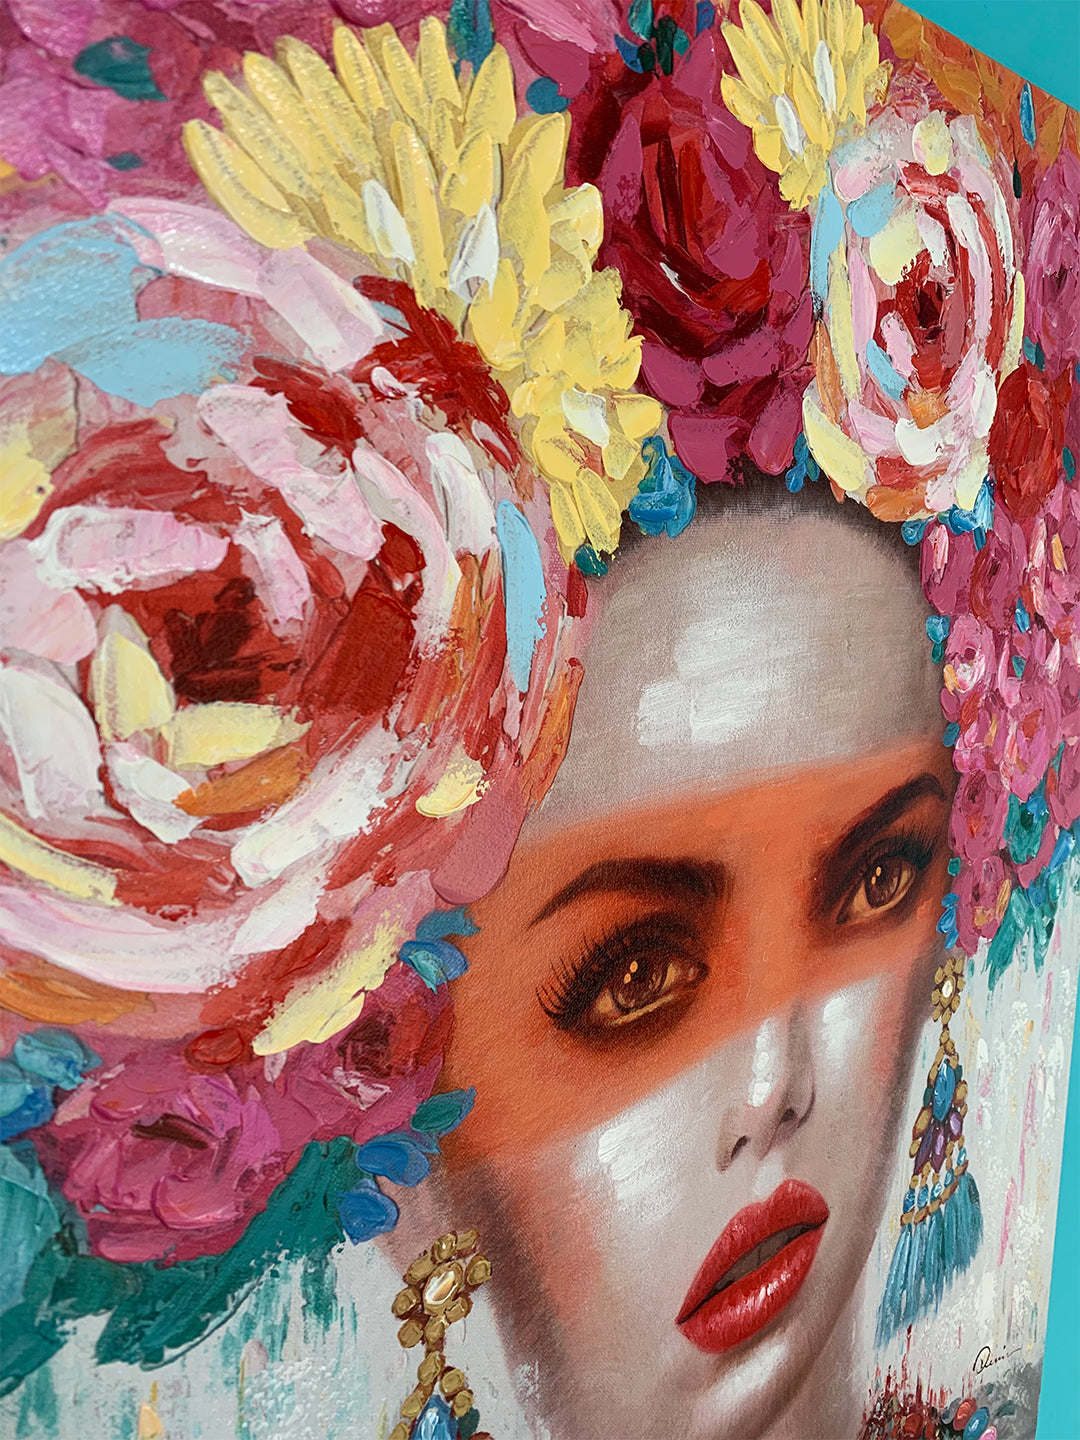 Locomocean Hand-painted Wall Art Woman With Floral Headdresses